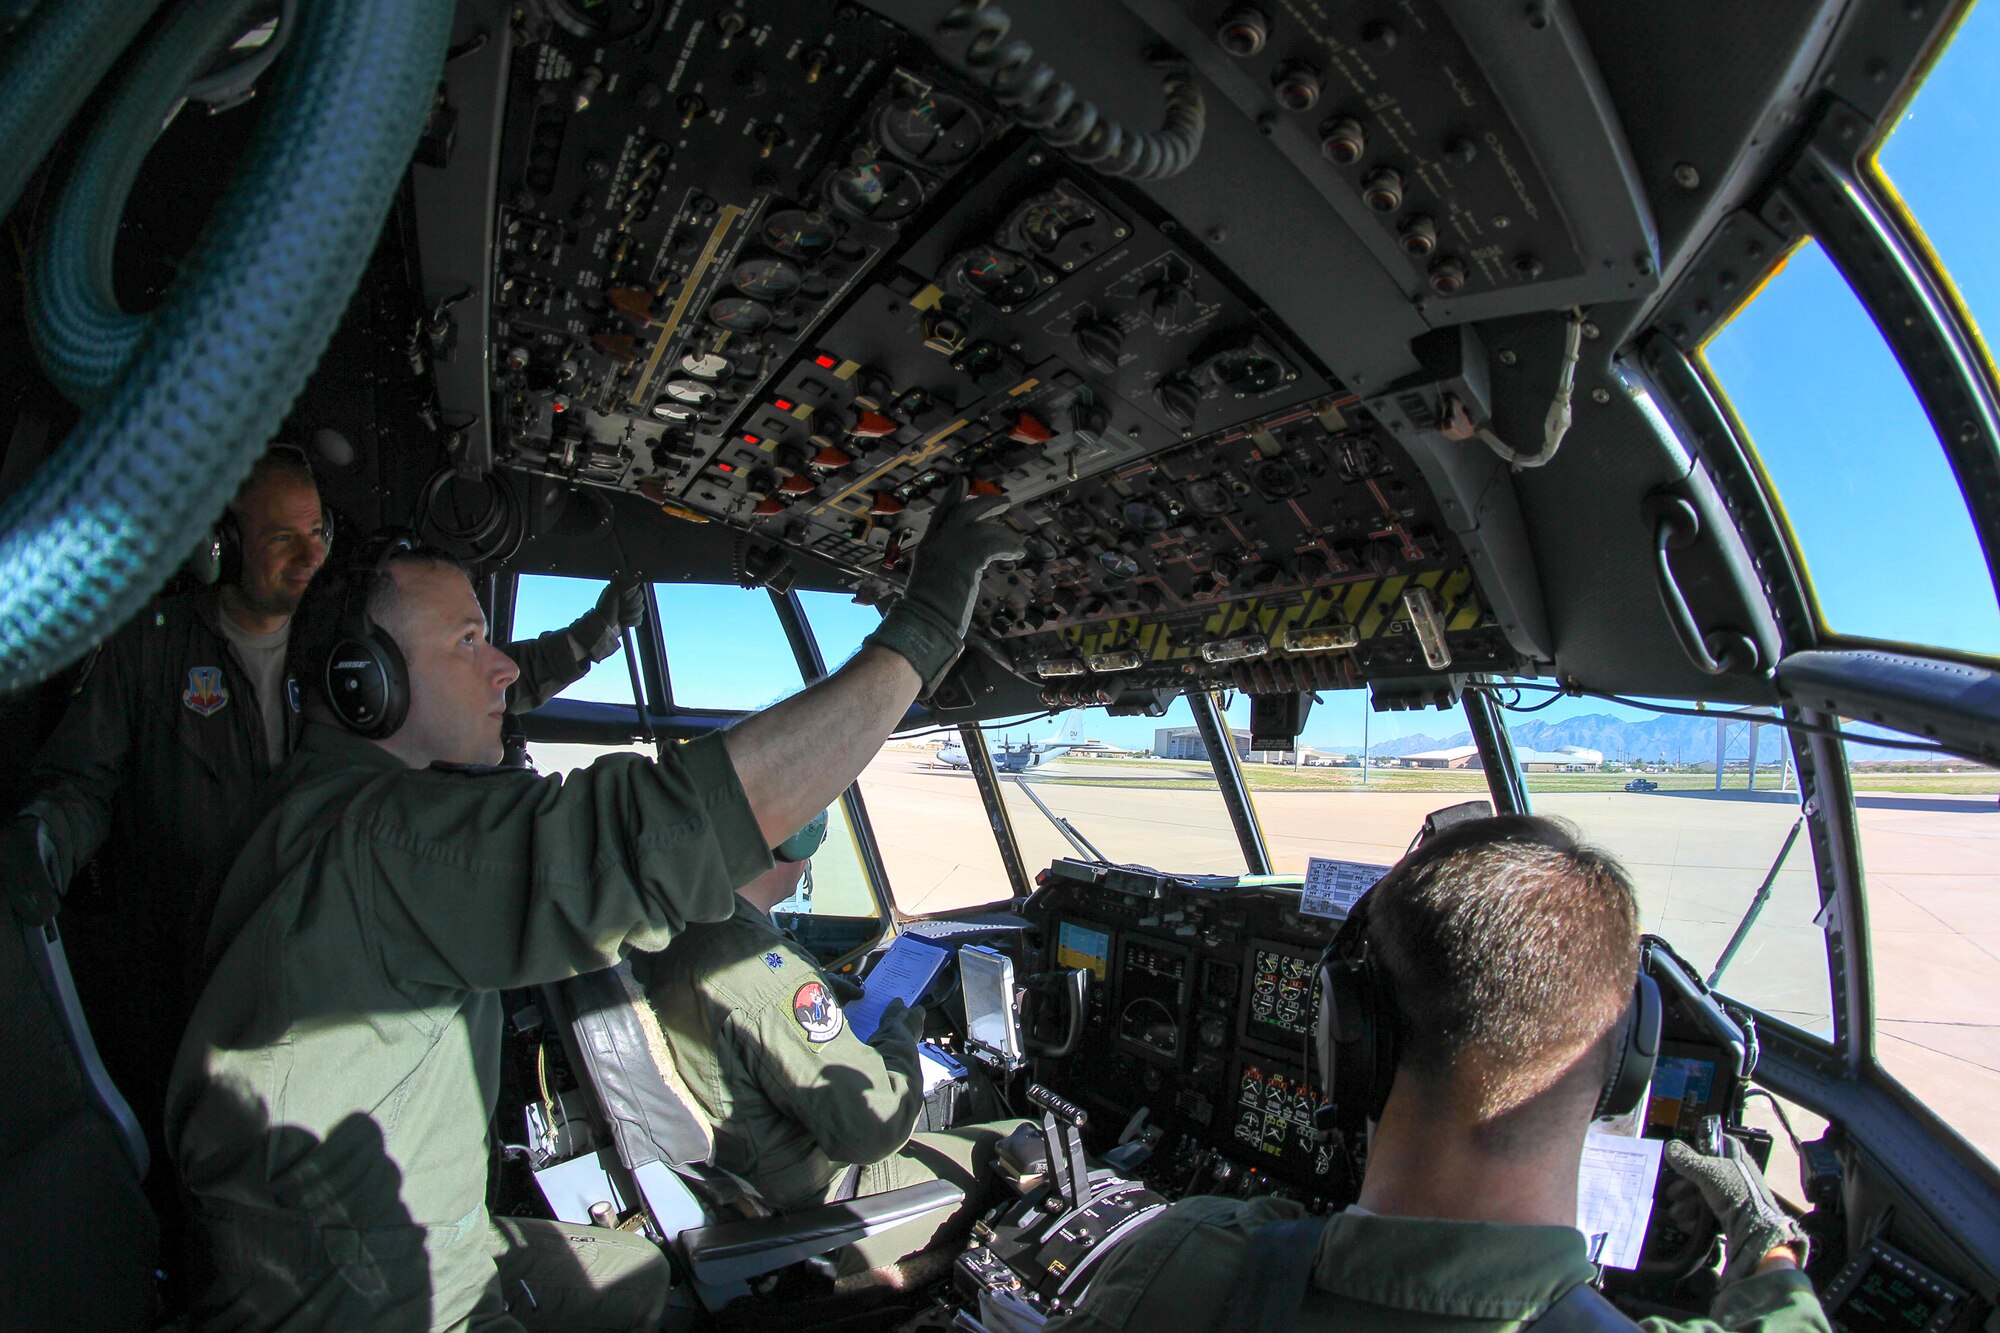 U.S. Airmen from the 42nd Electronic Combat Squadron perform pre-flight checks in an EC-130H Compass Call before executing its first training mission with an upgraded cockpit acquired via an avionic viability program at Davis-Monthan Air Force Base, Ariz., July 11, 2016. The 42nd ECS’s Compass Calls were the first to be upgraded in an Air Force-wide plan to update its entire fleet of EC-130s via the AVP. (Courtesy photo/Released)